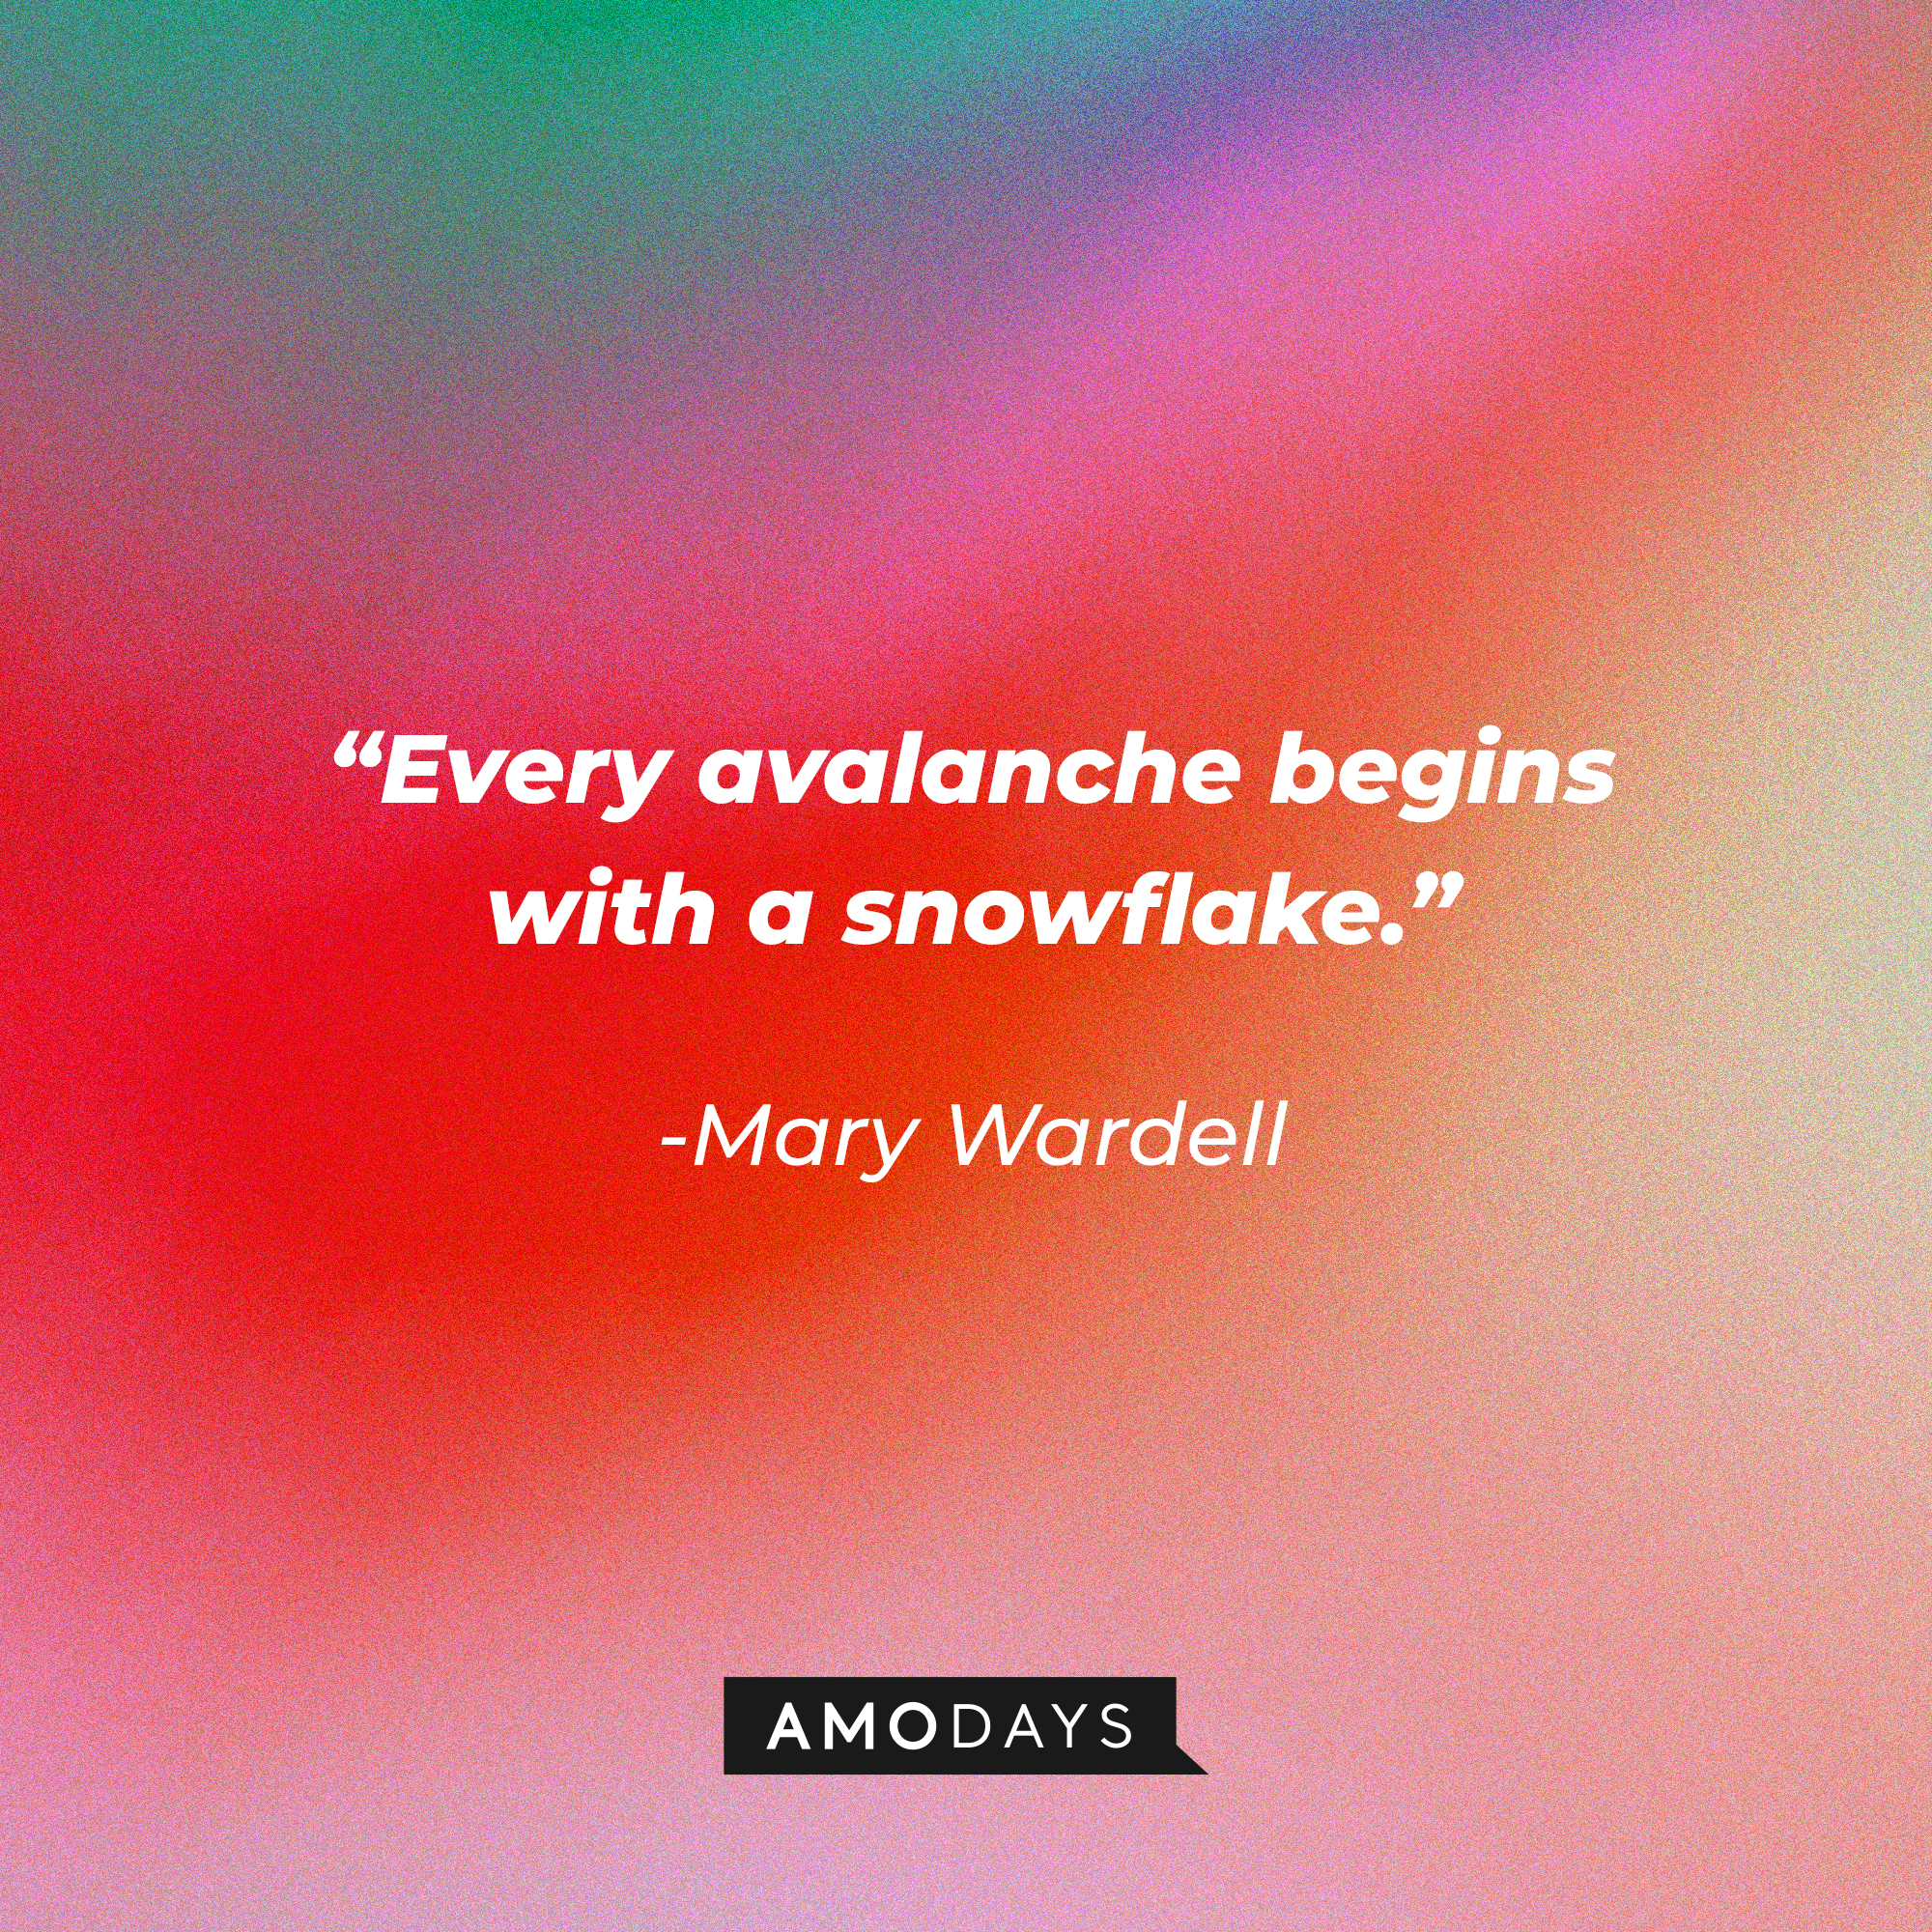 Mary Wardell's quote: “Every avalanche begins with a snowflake.” | Source: Amodays